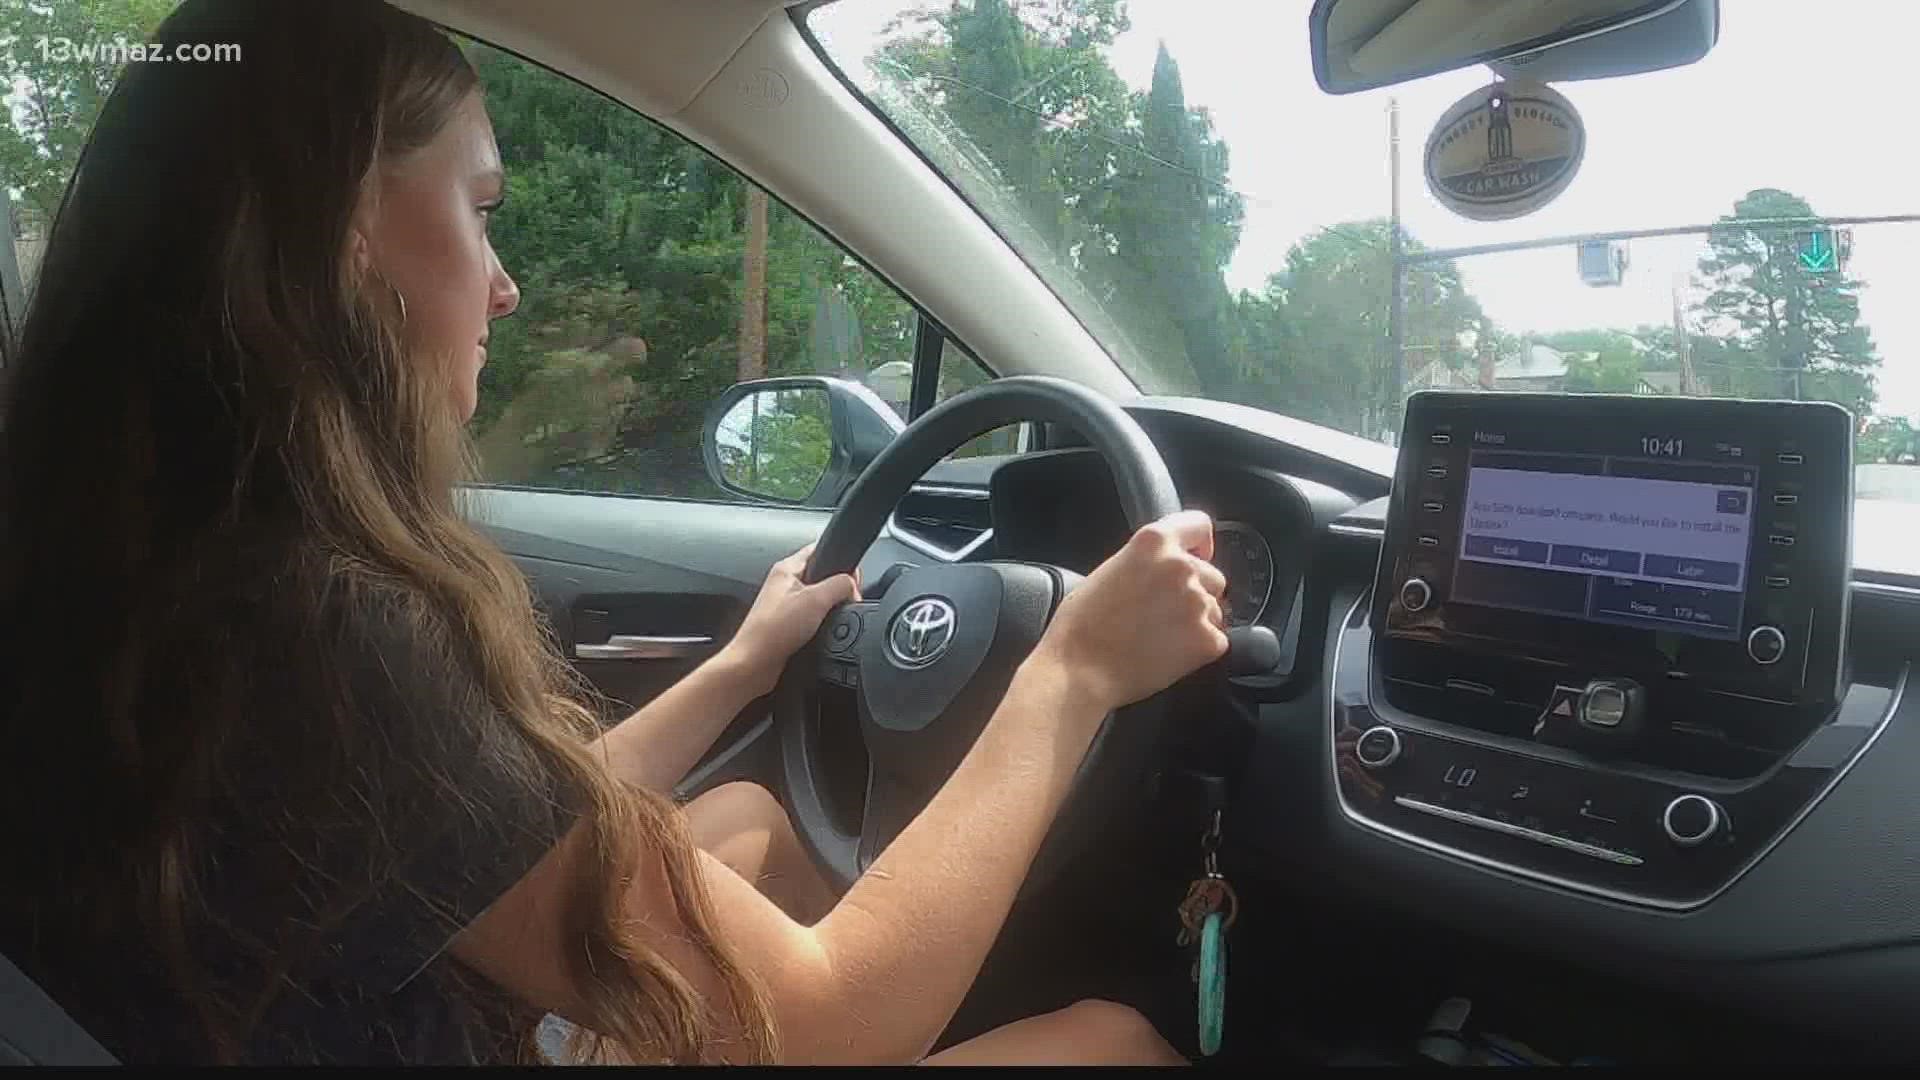 The 100 deadliest days for teen drivers start in summer and AAA predicts the road to be more dangerous.